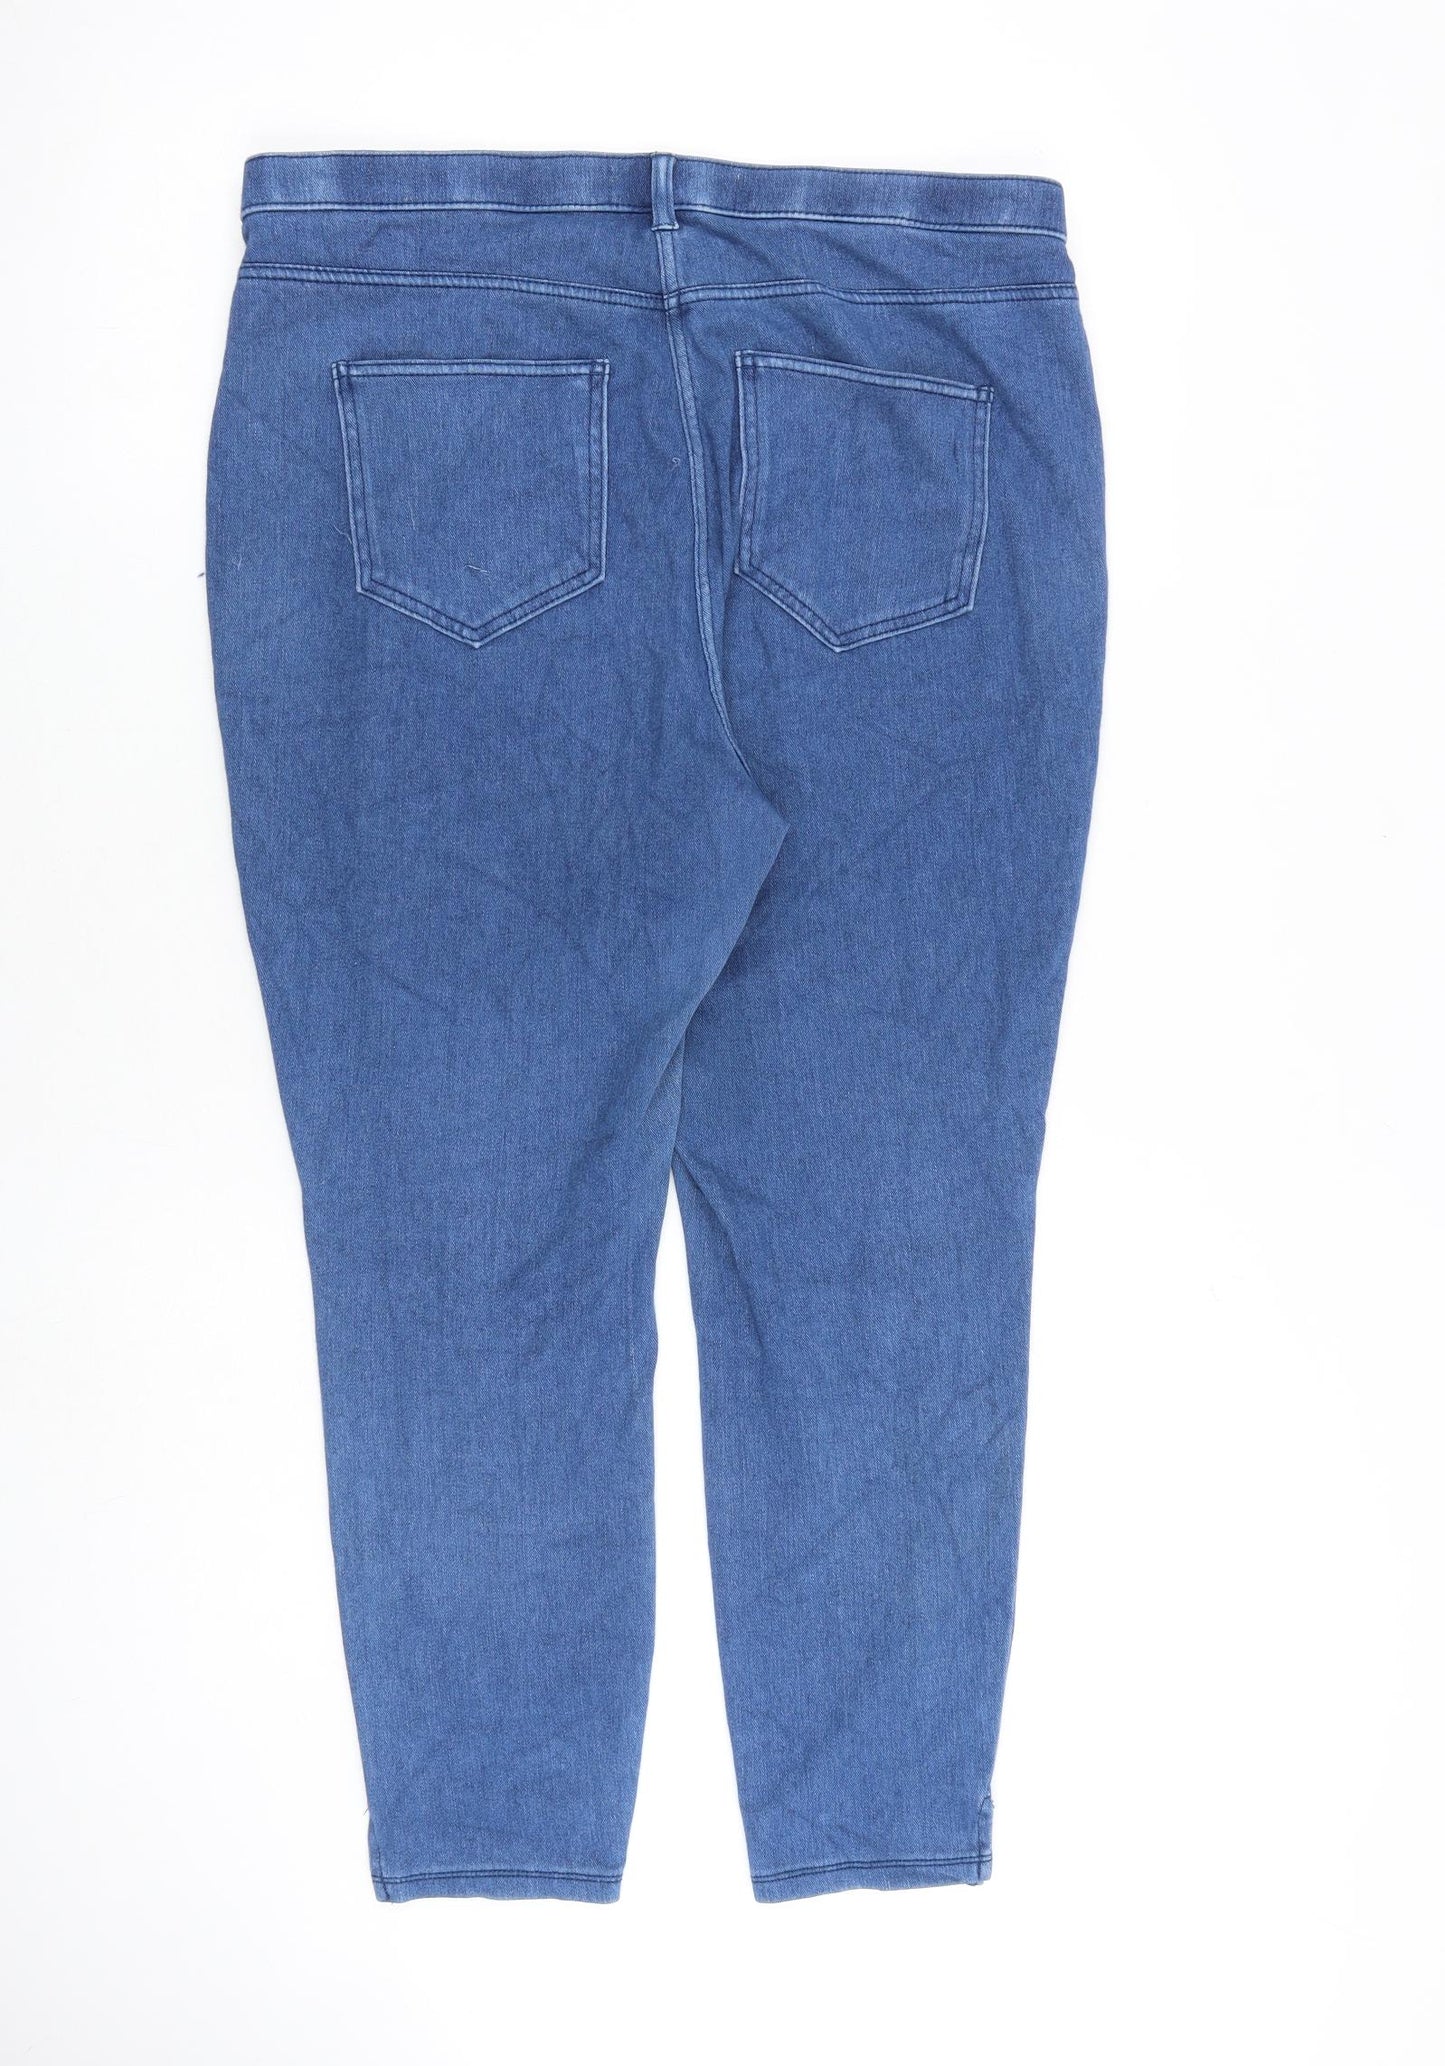 NEXT Womens Blue Cotton Jegging Jeans Size 16 L25 in Regular